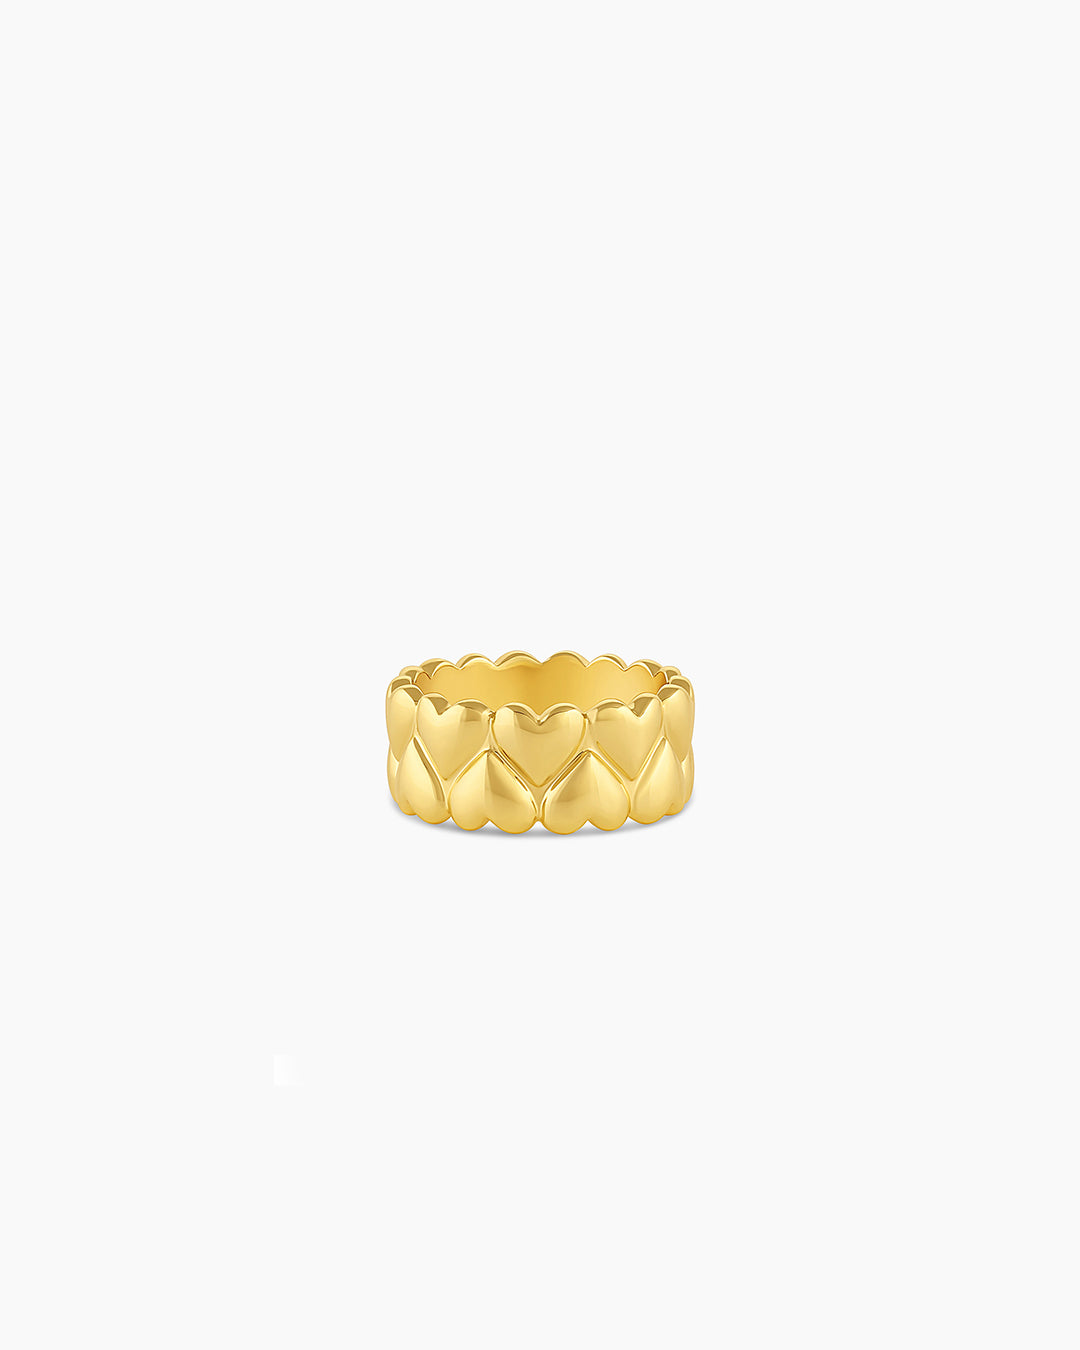 White Gold Chanel Logo Ring With Diamonds | 3D Print Model